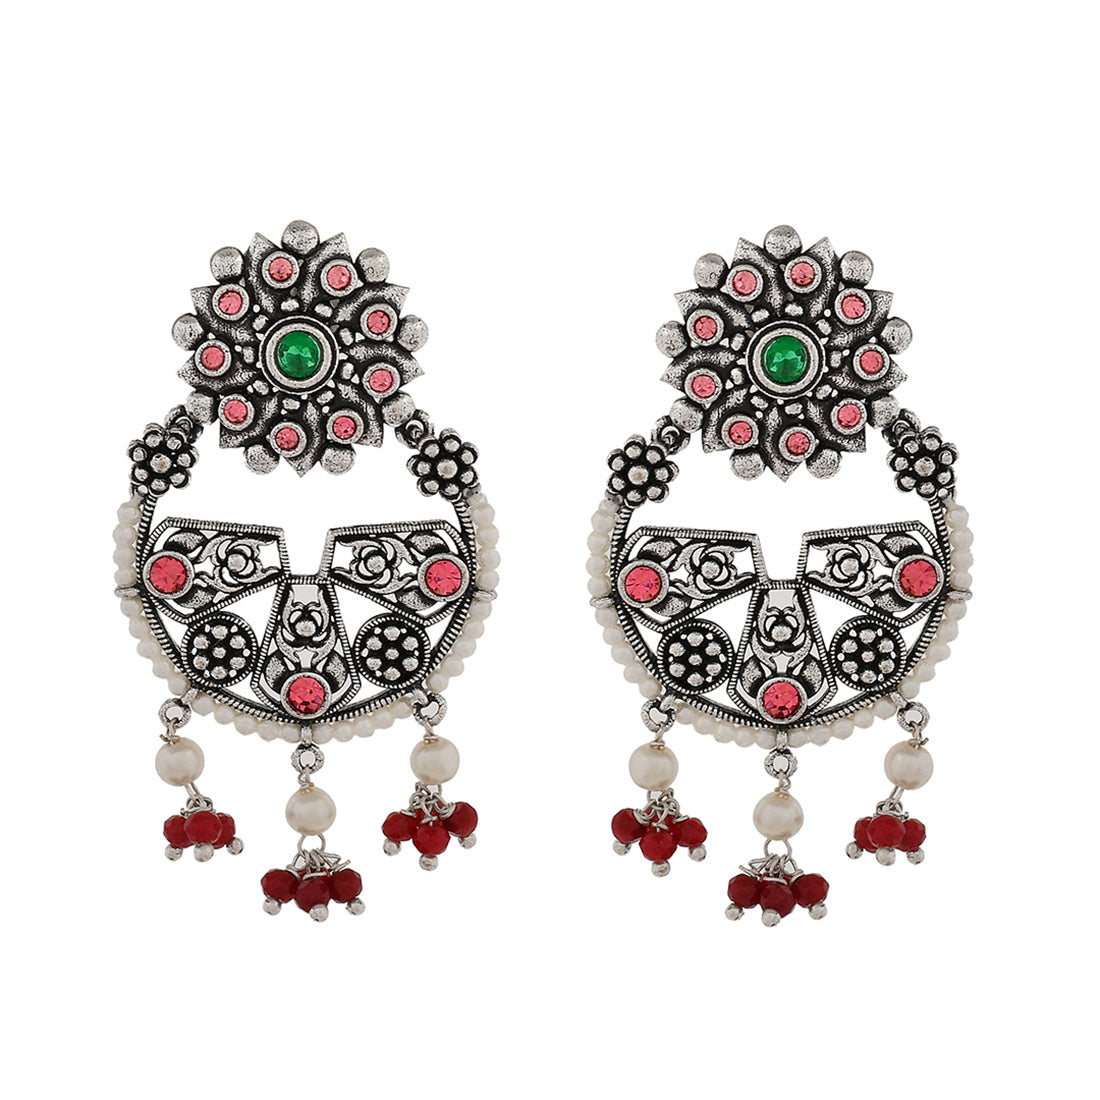 Women's Abharan Pink Stones And White Pearls Floral Earrings - Voylla